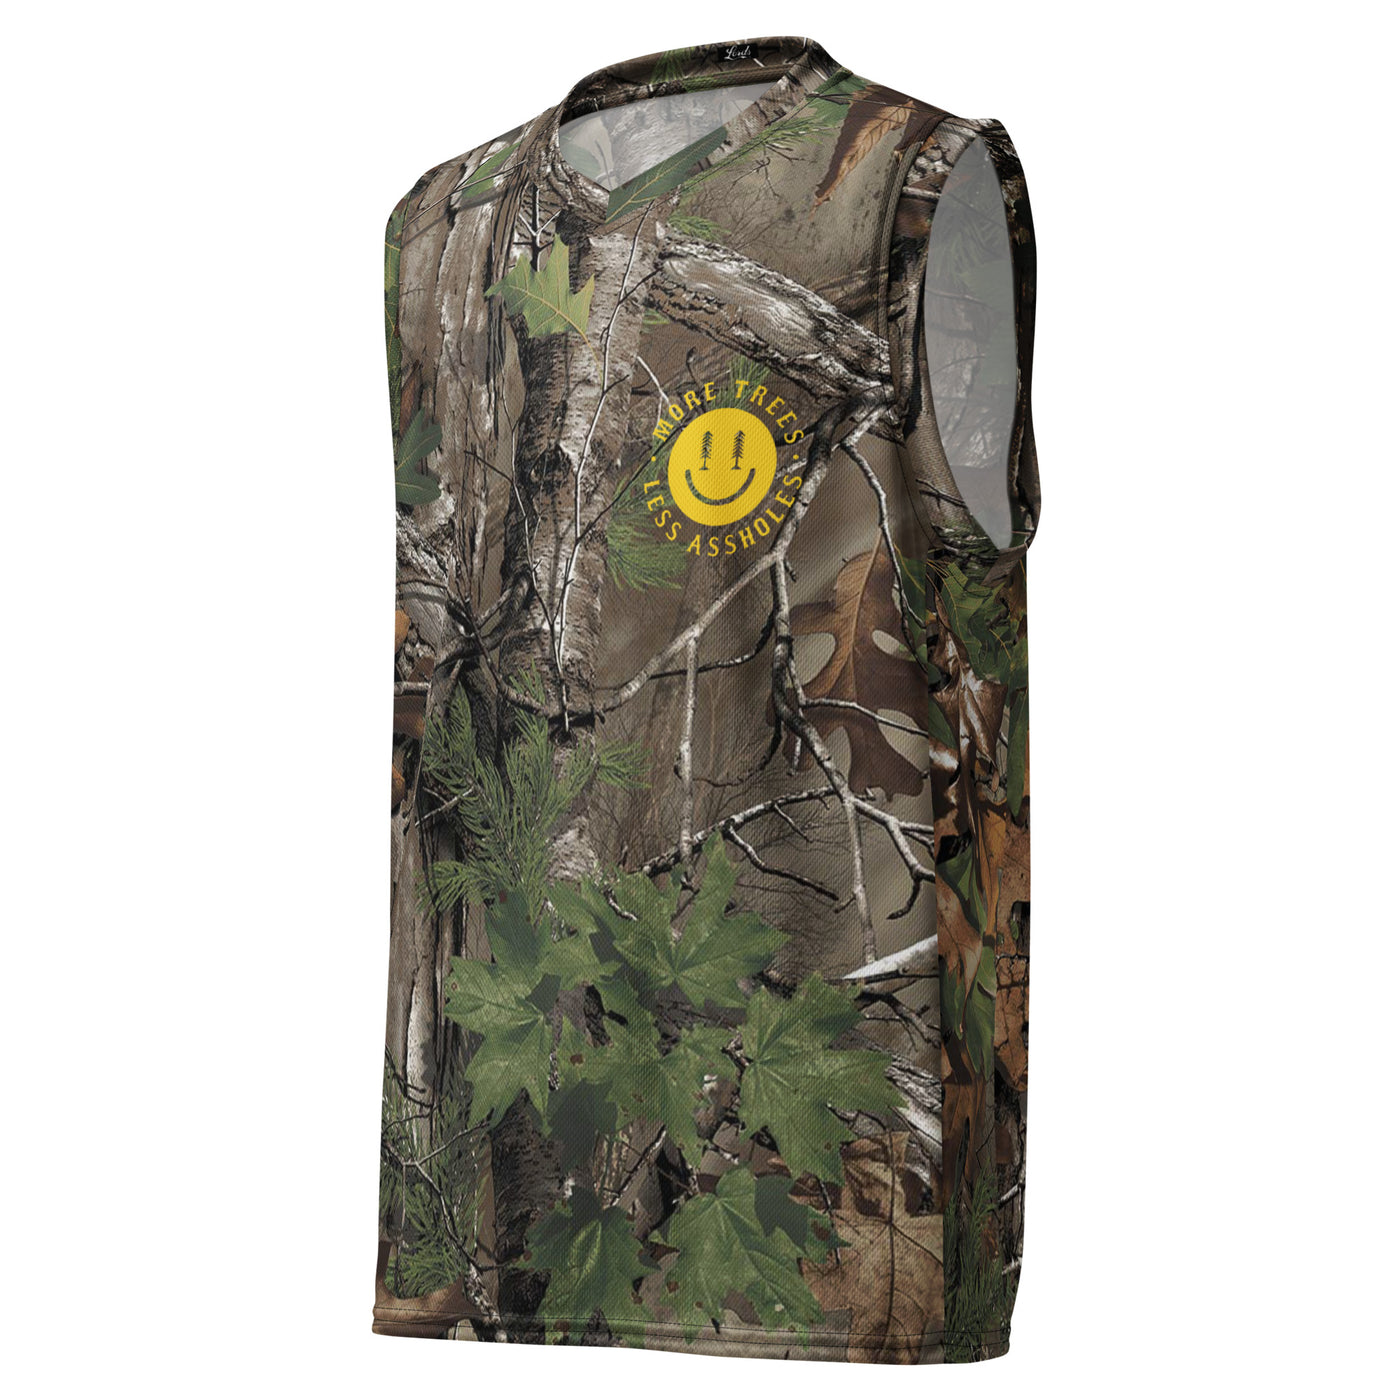 Lords x More Trees Hardwood Jersey - Realtree Camo